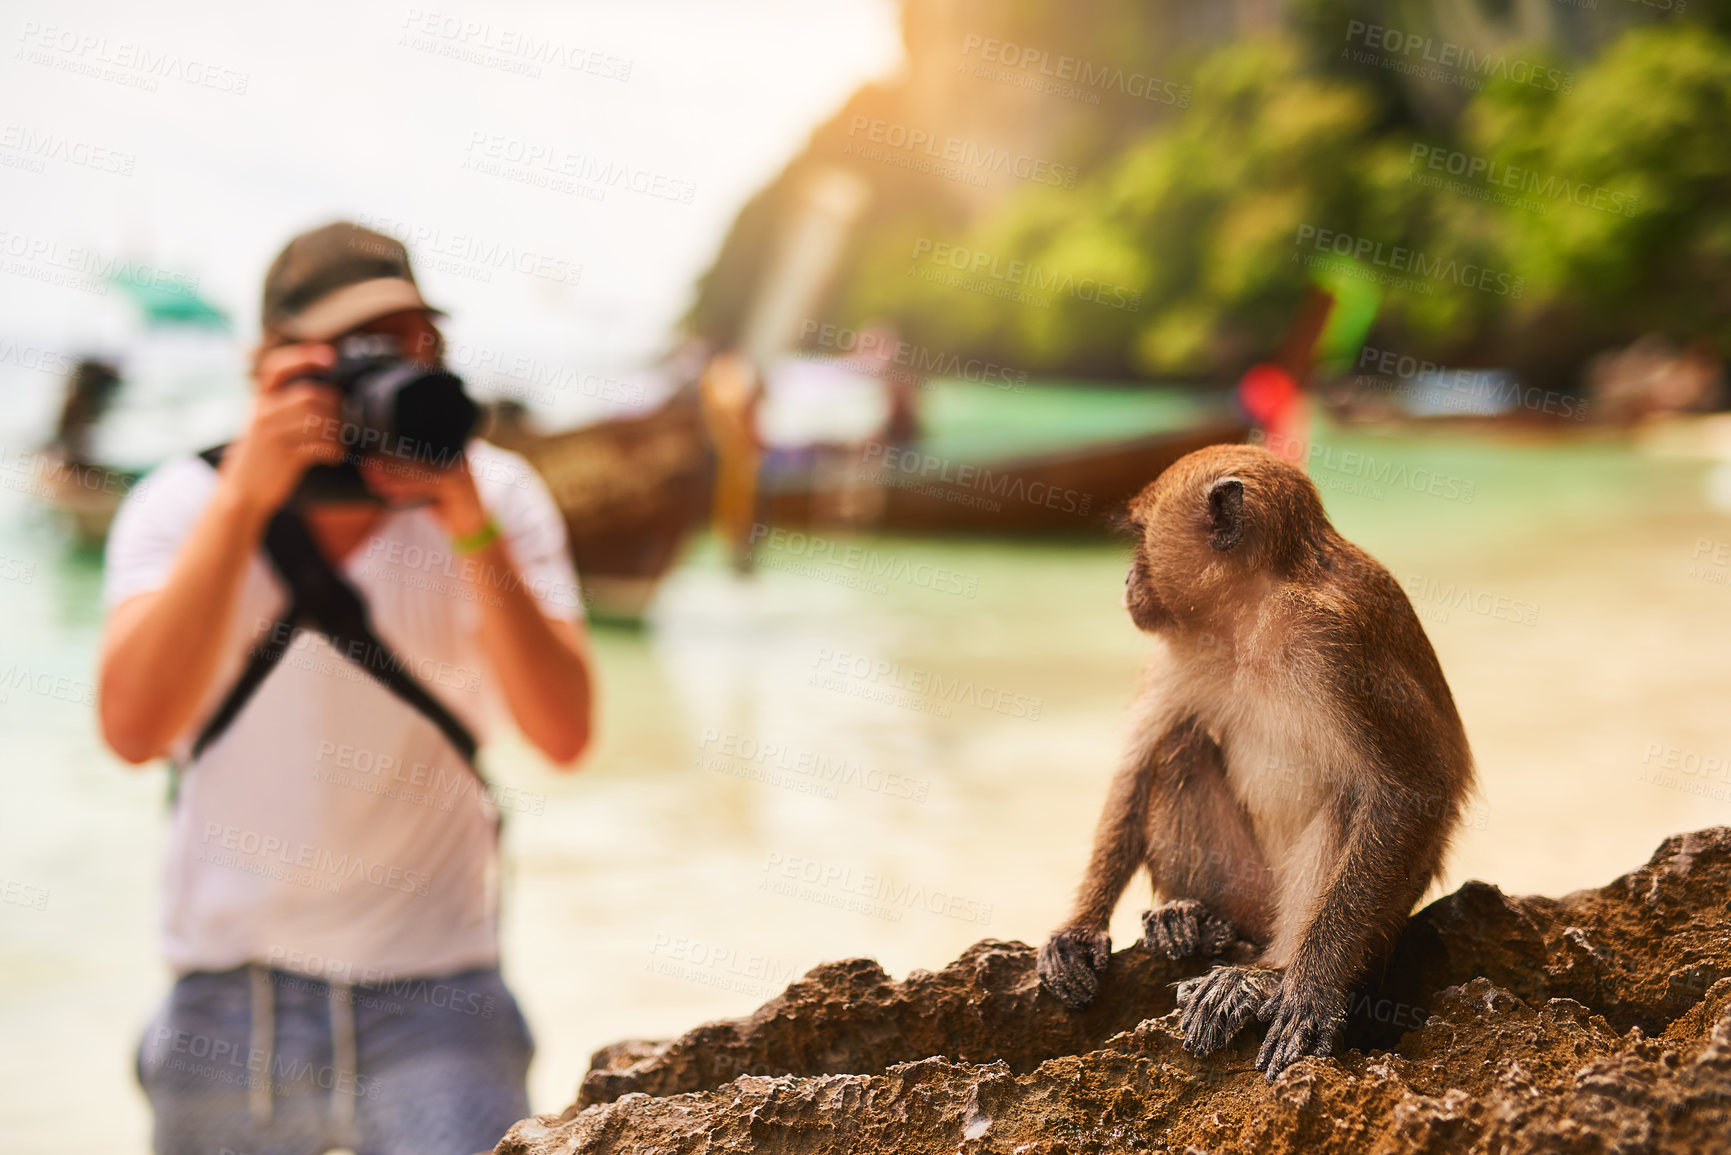 Buy stock photo Shot of a young tourist taking a picture of a monkey while exploring a tropical beach